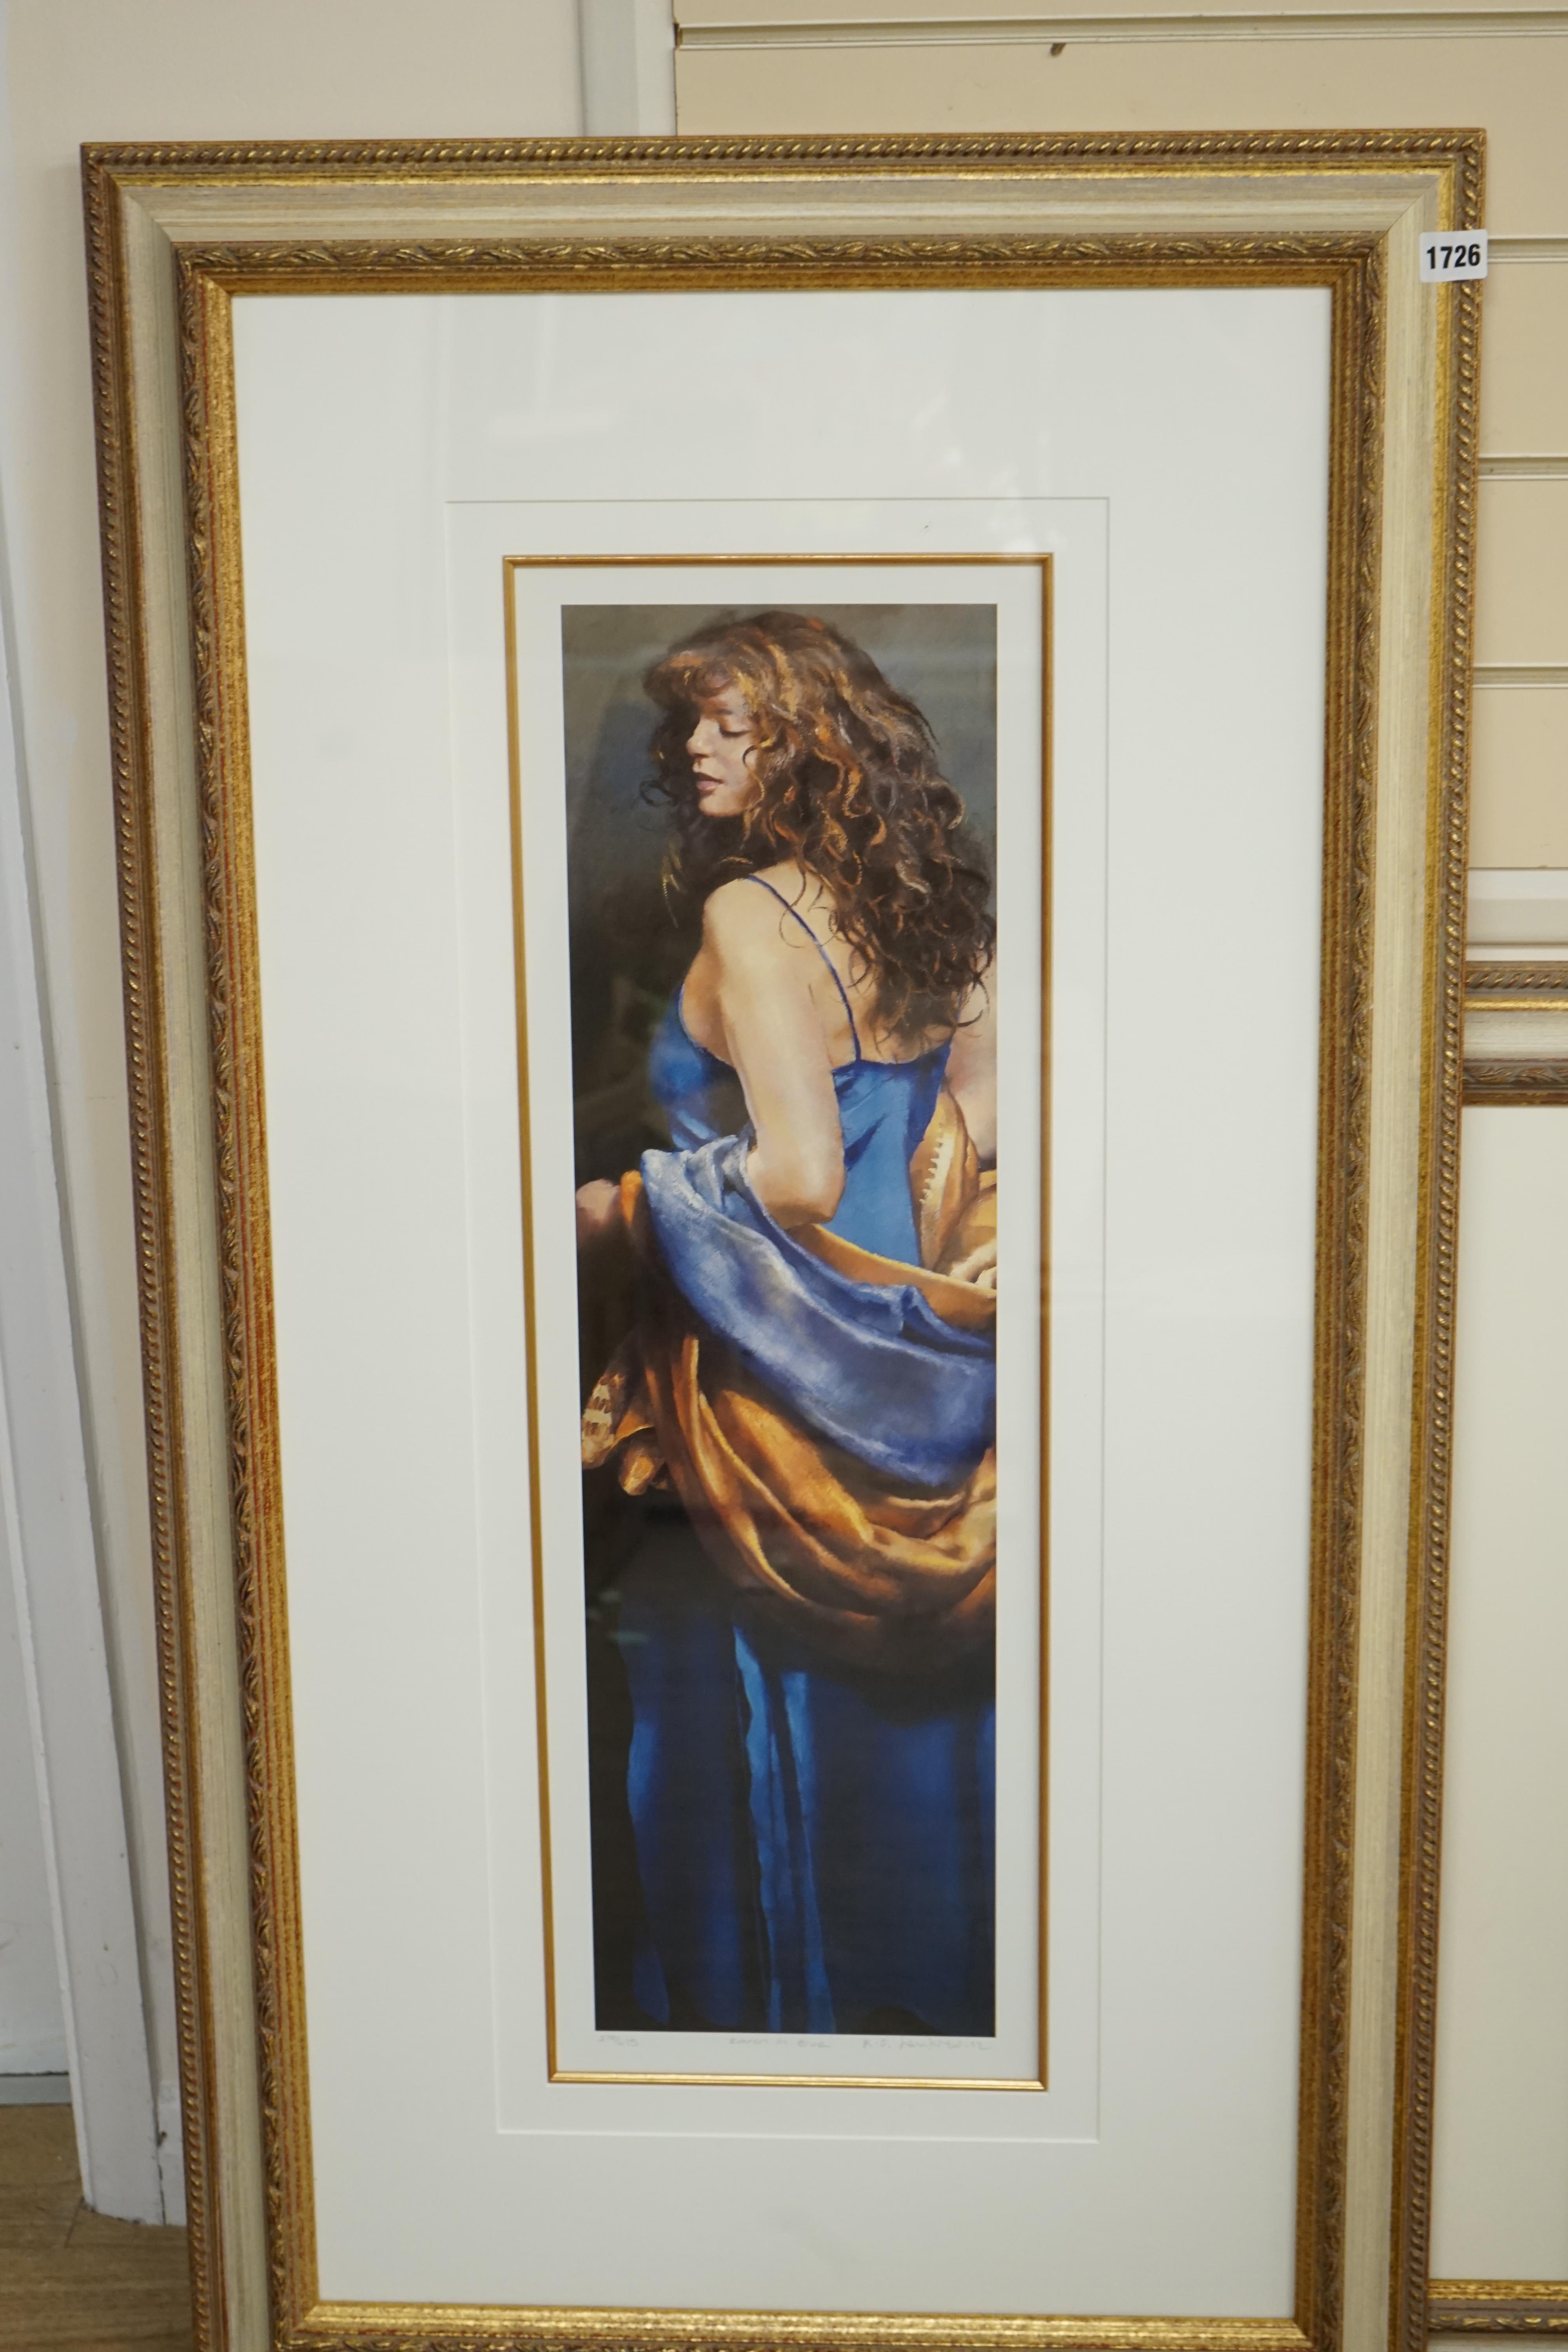 Robert Lenkiewicz (1941-2002), offset lithograph, 'Karen in Blue', signed in pencil and titled, 27/475, 71 x 20cm. Condition - good